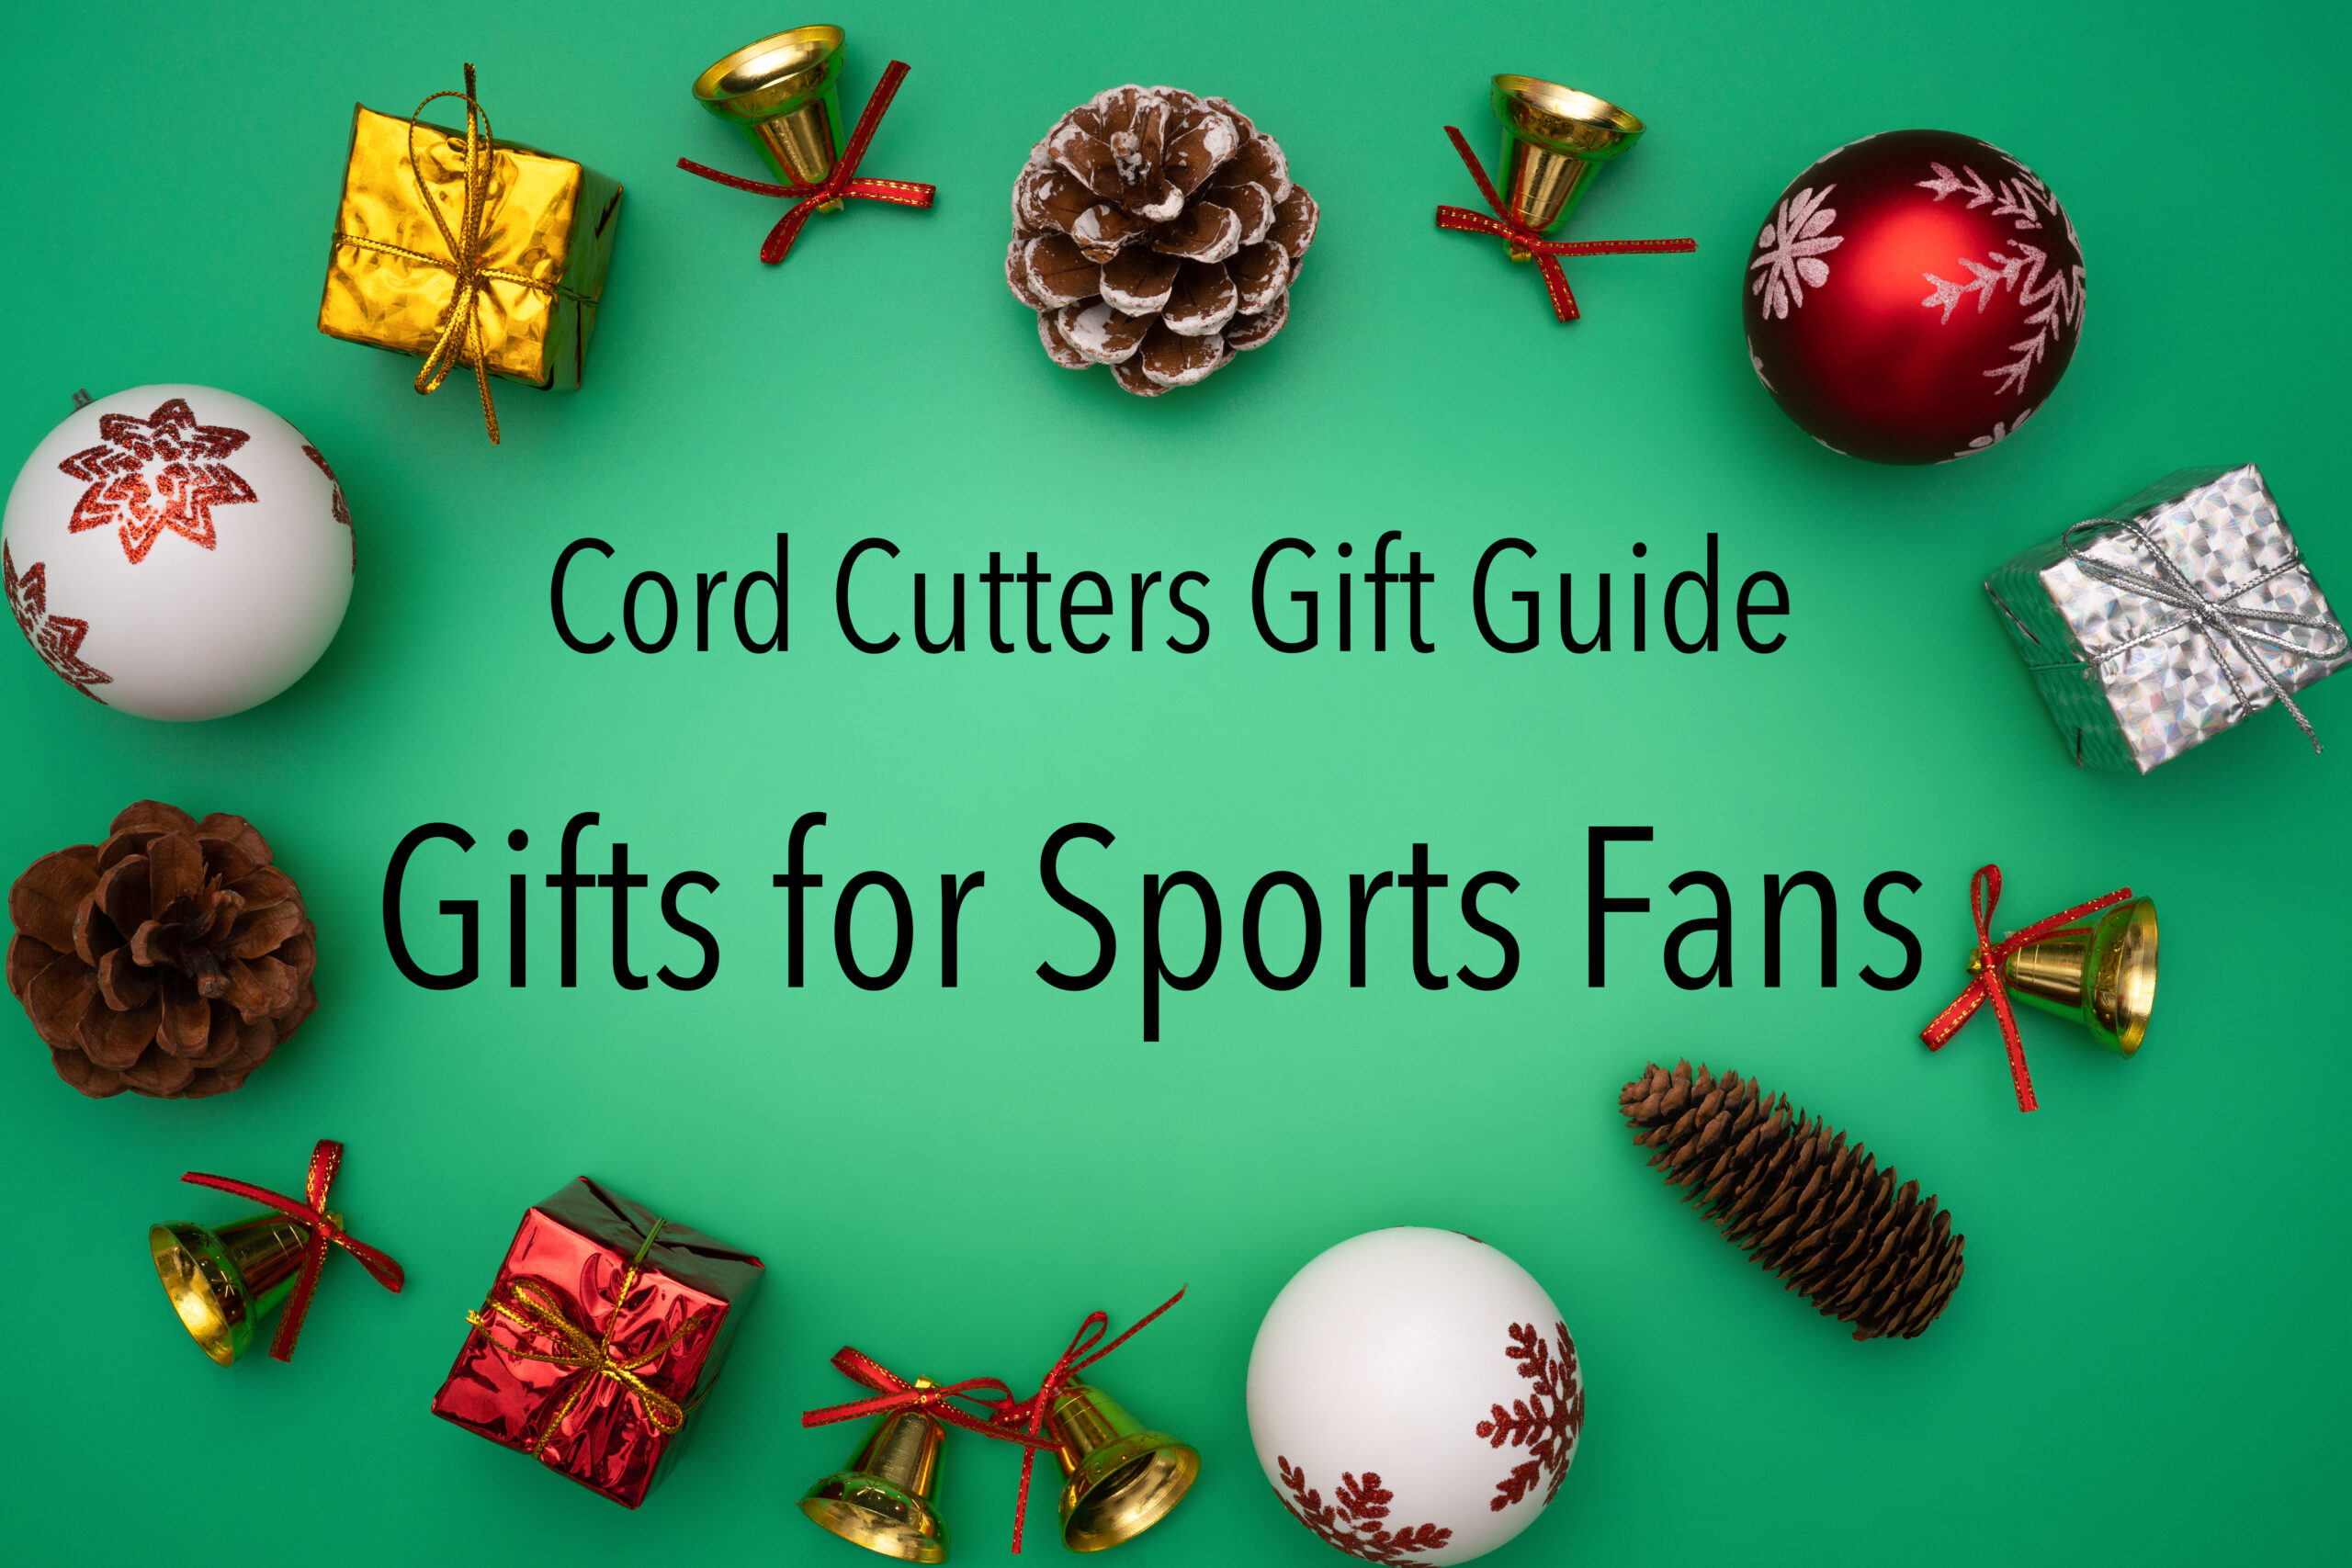 10 Gifts for Sports Fans of Every League and Team Shopping Guide for NonSports  Fans  HappyCardscom